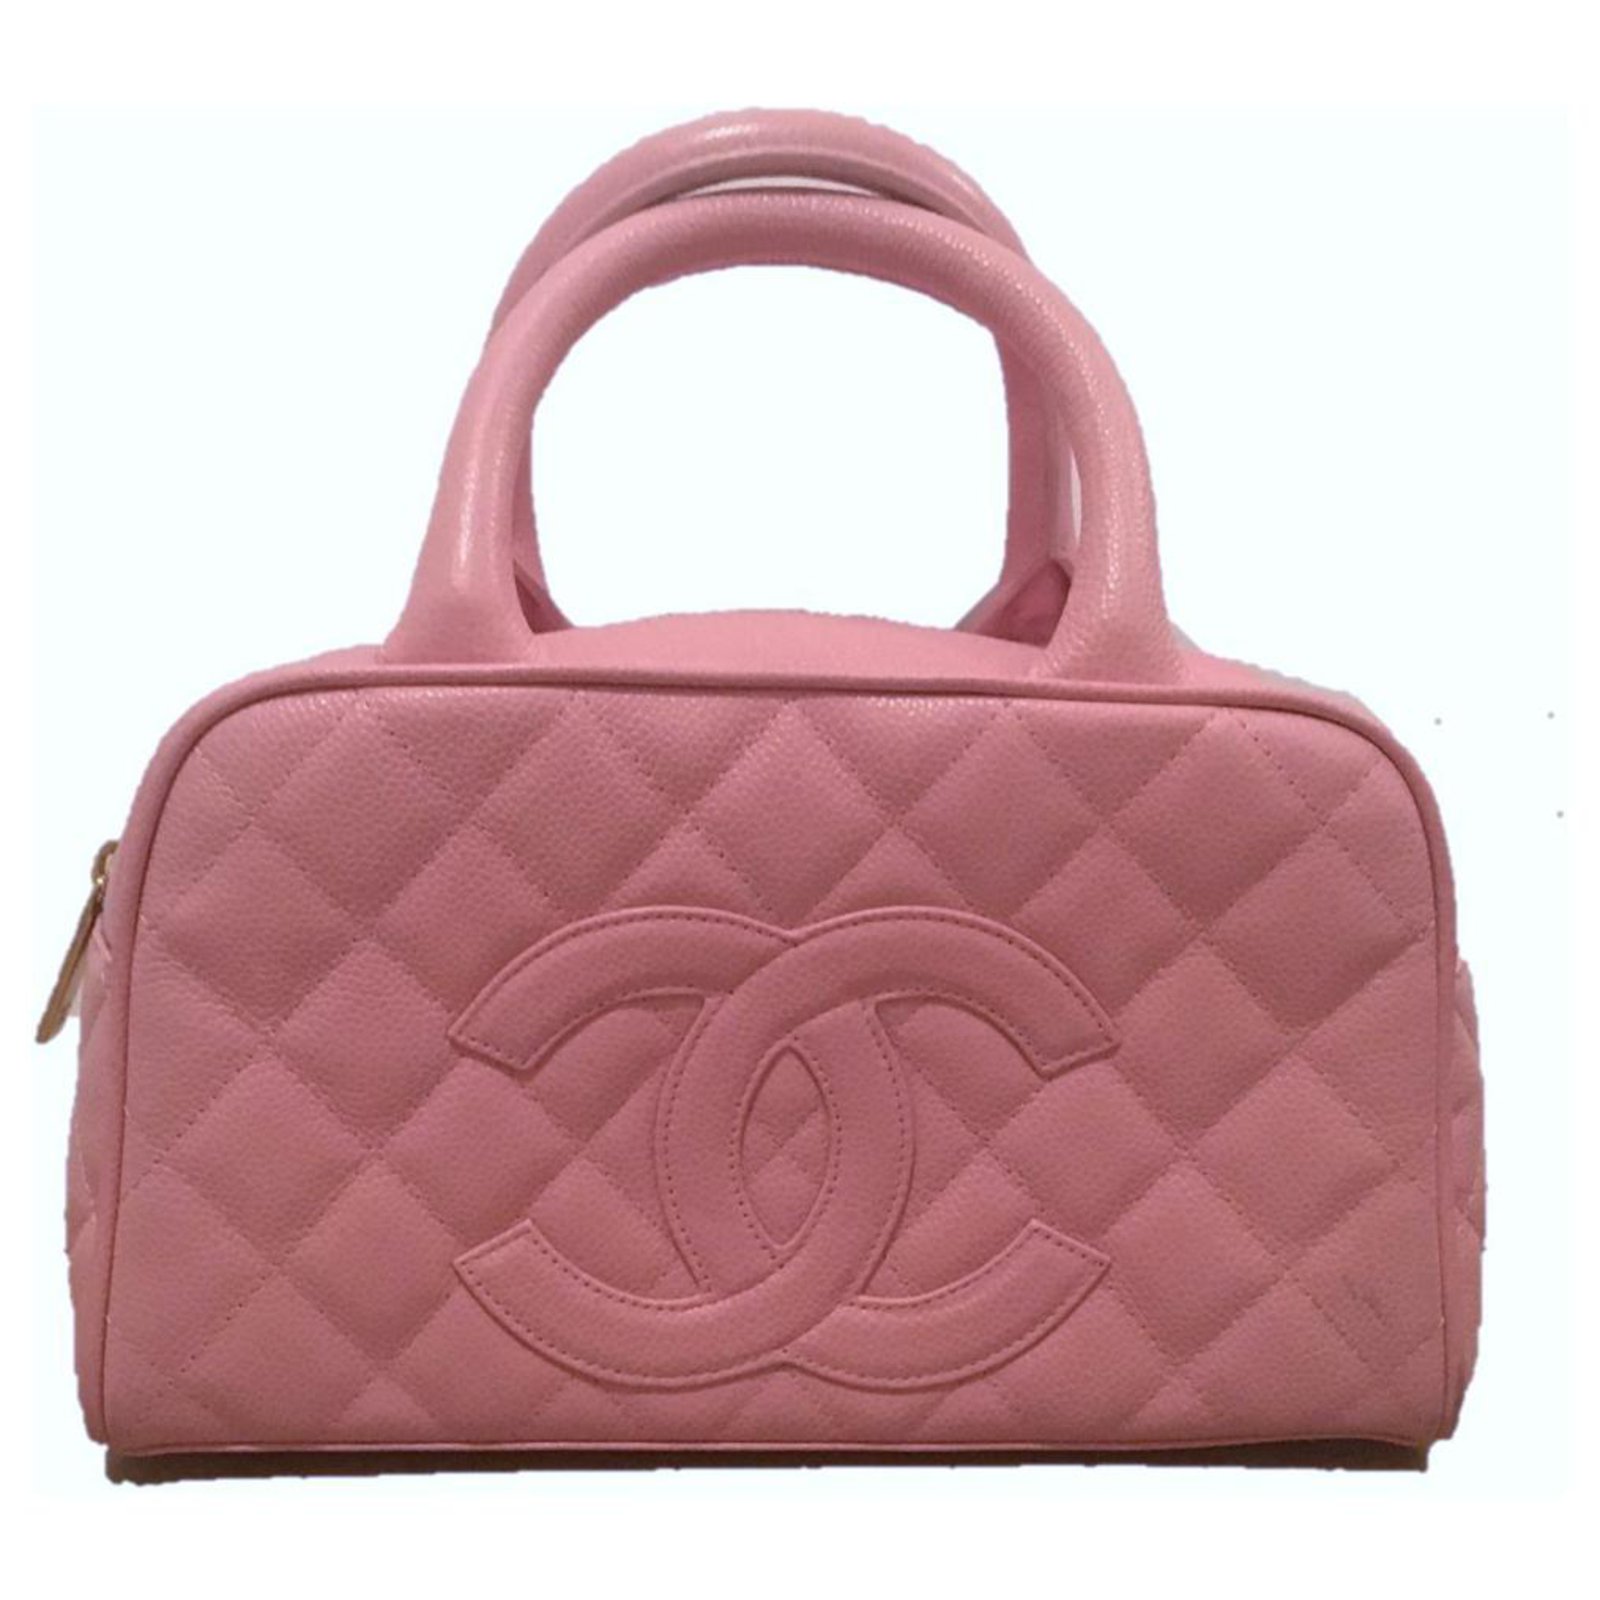 CHANEL BOWLING PINK BAG two top handles with top zip closure iconic CC  logo at the front fabric lining with internal pocket gold tone hardware  authenticity card c 20032004 with dust bag